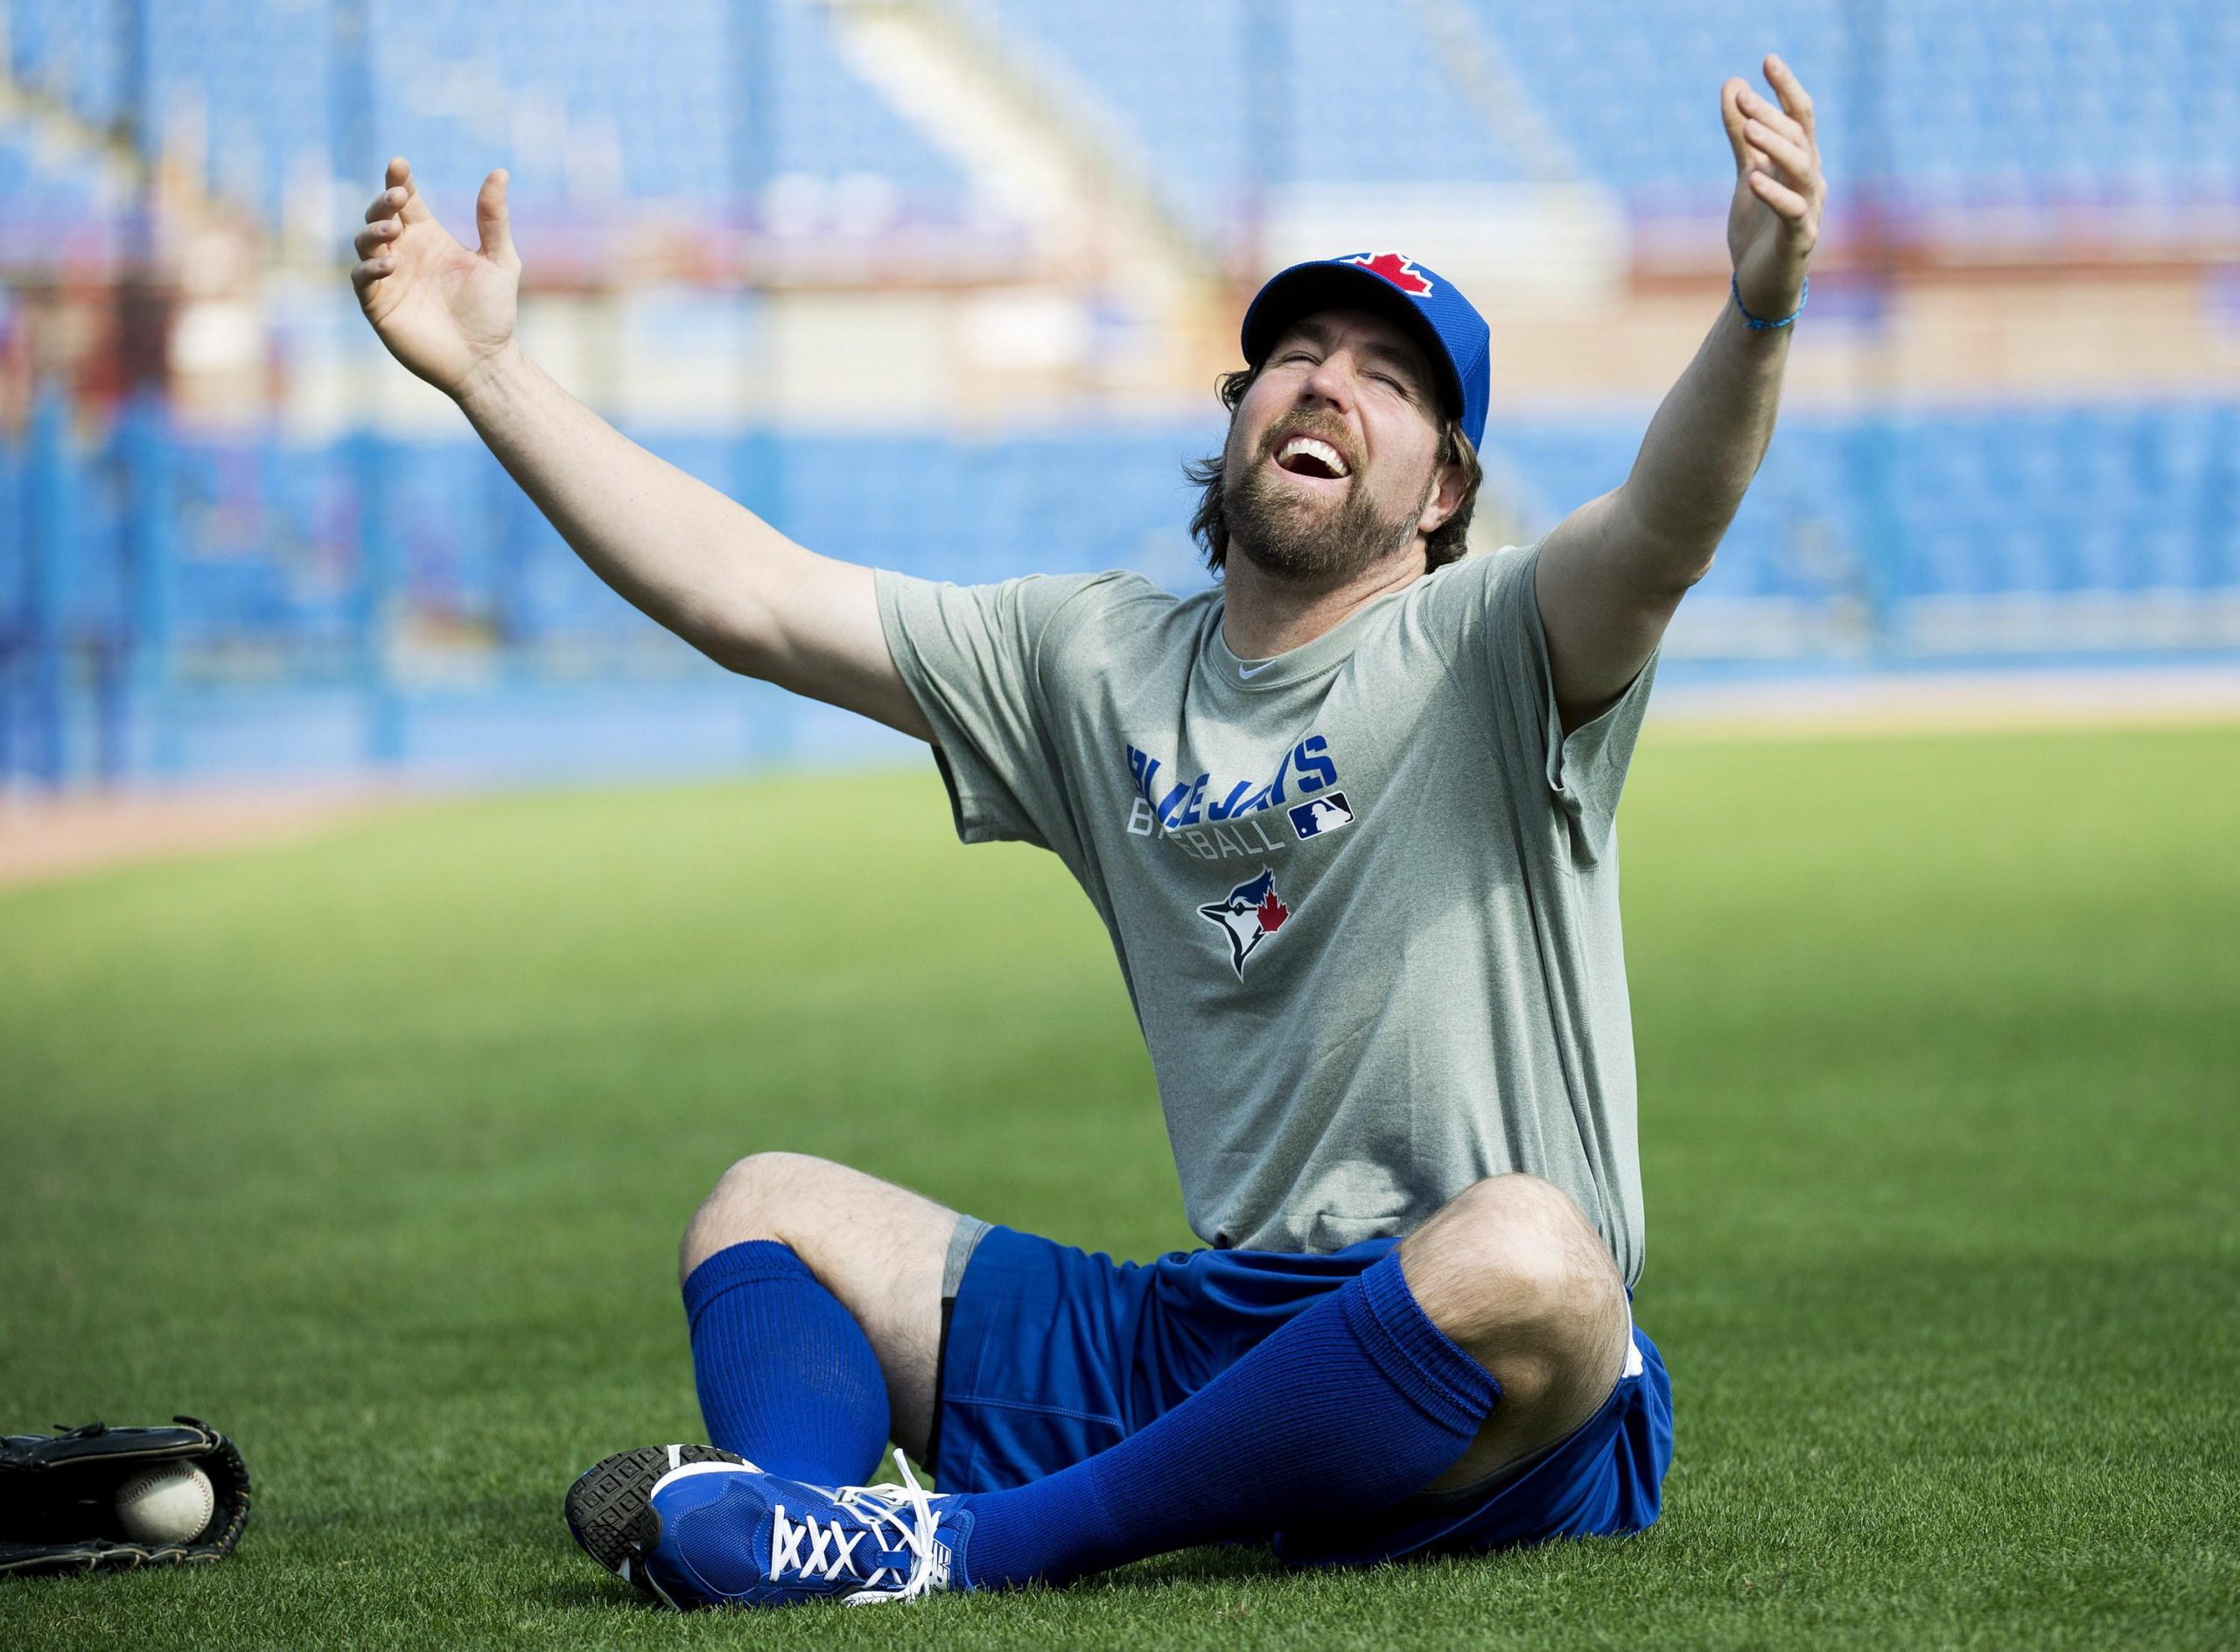 R.A. Dickey had one of the more improbable Cy Young seasons ever